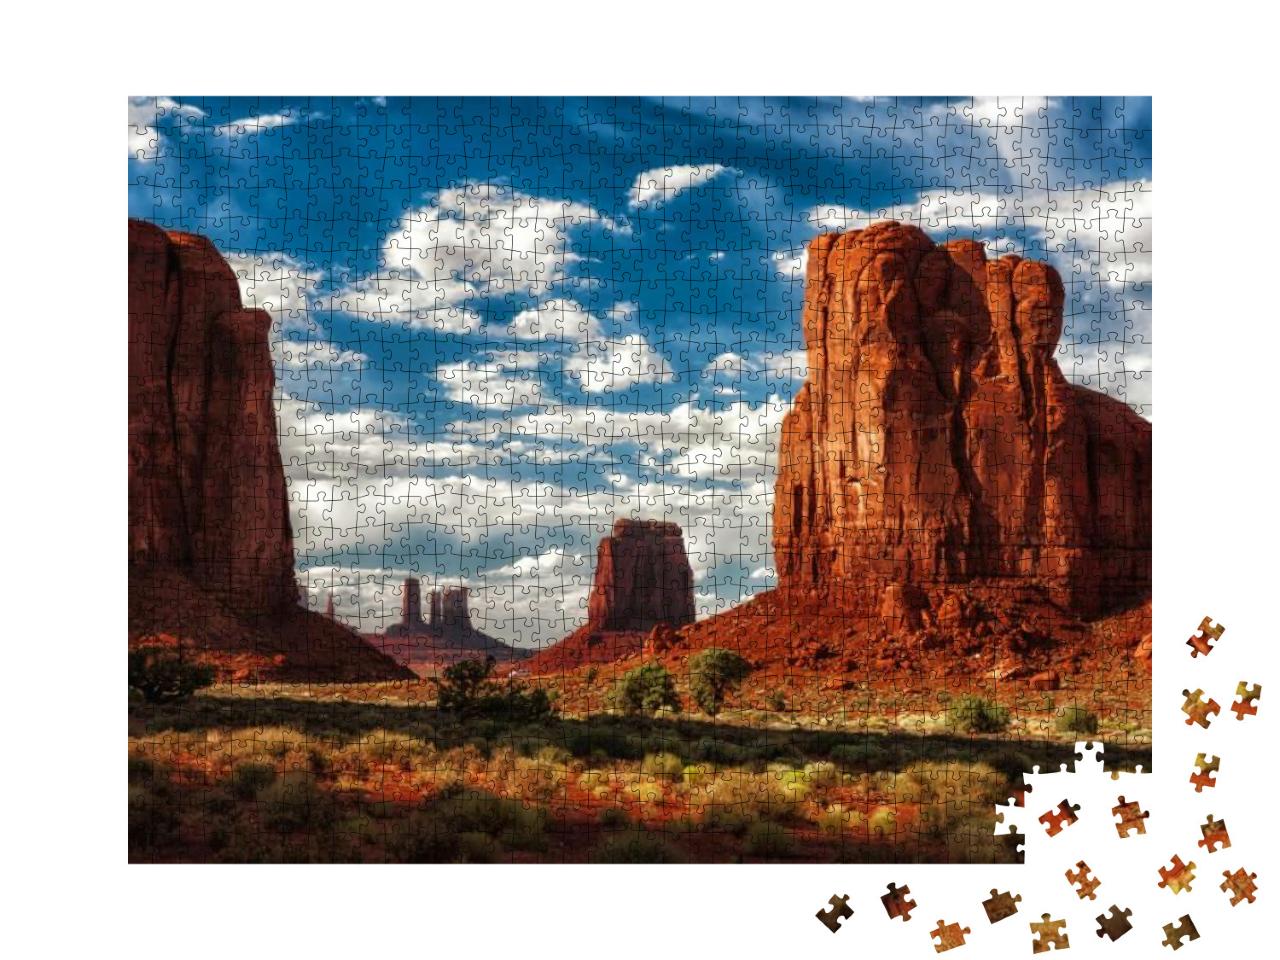 Monument Valley... Jigsaw Puzzle with 1000 pieces